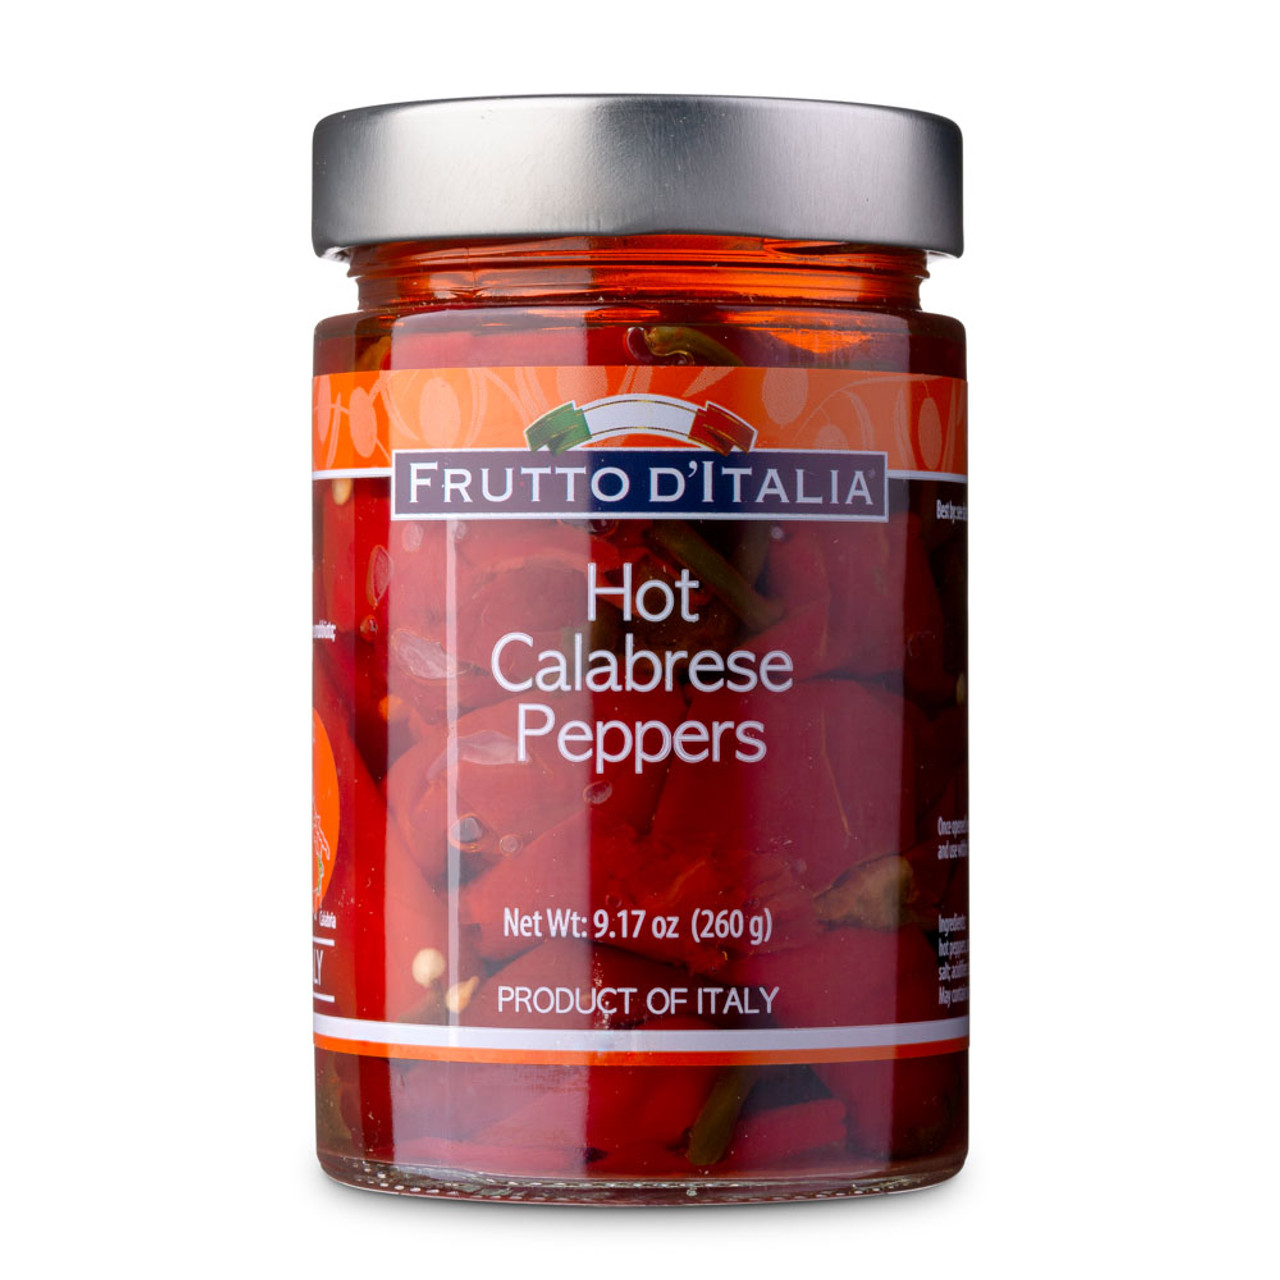 https://cdn11.bigcommerce.com/s-cznxq08r7/images/stencil/1280x1280/products/4505/12472/51095-Frutto-DItalia-Hot-Calabrese-Peppers-9-pt-17-oz-Jar-01__74278.1604353456.jpg?c=1